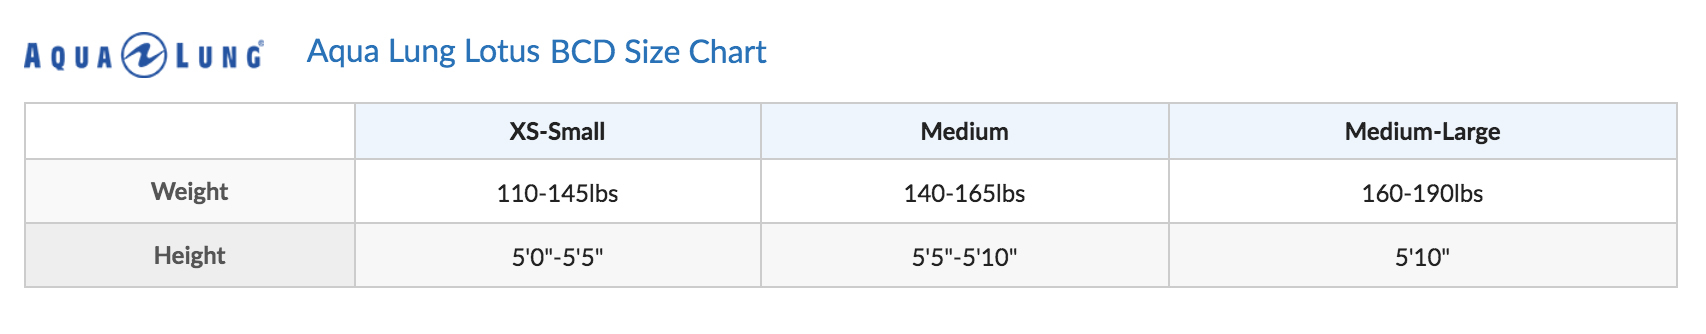 Female Size Chart for Lotus BCD